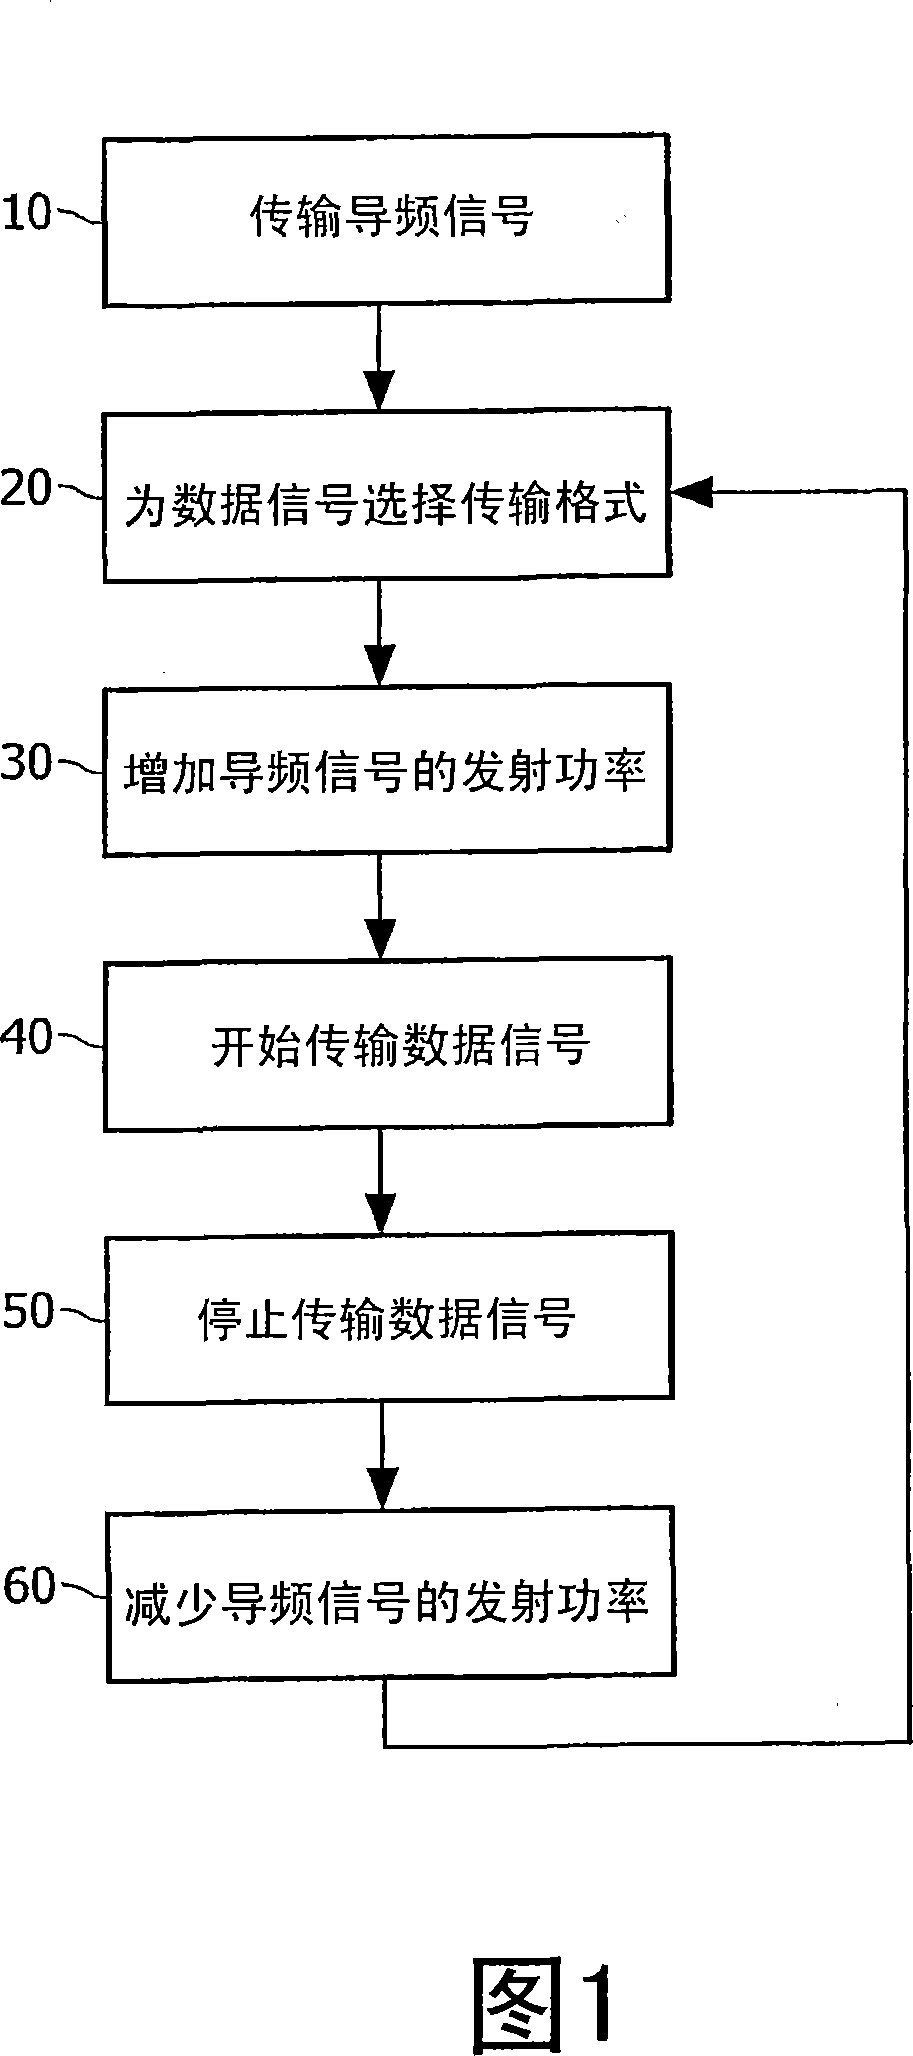 A radio communication system, a radio station, and a method of transmitting data